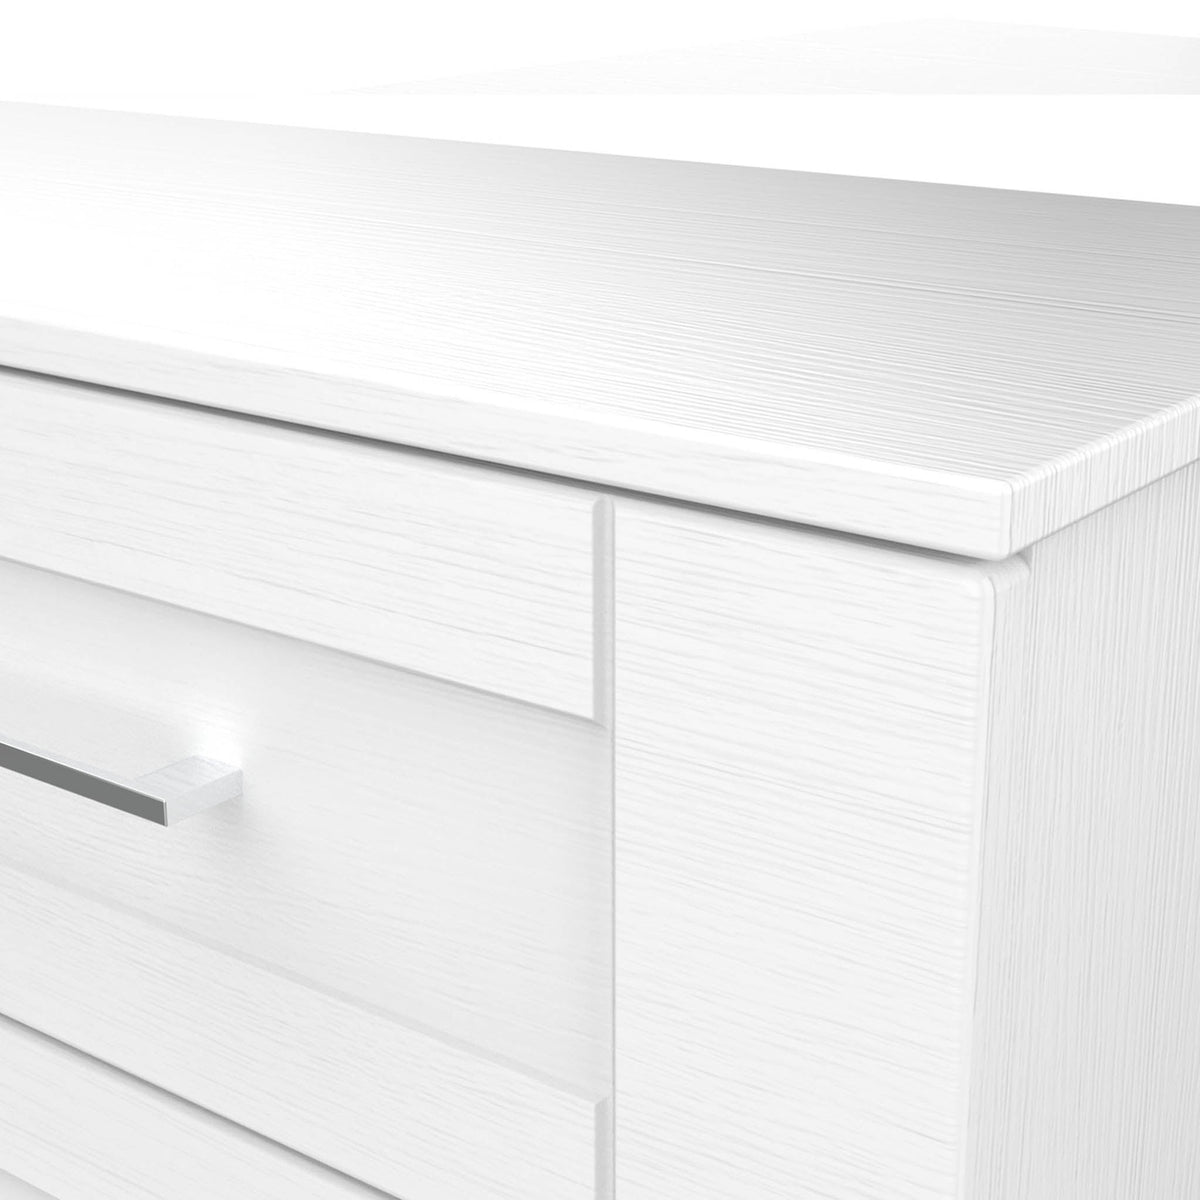 Bellamy White 6 Drawer Wide Chest of Drawers from Roseland Furniture